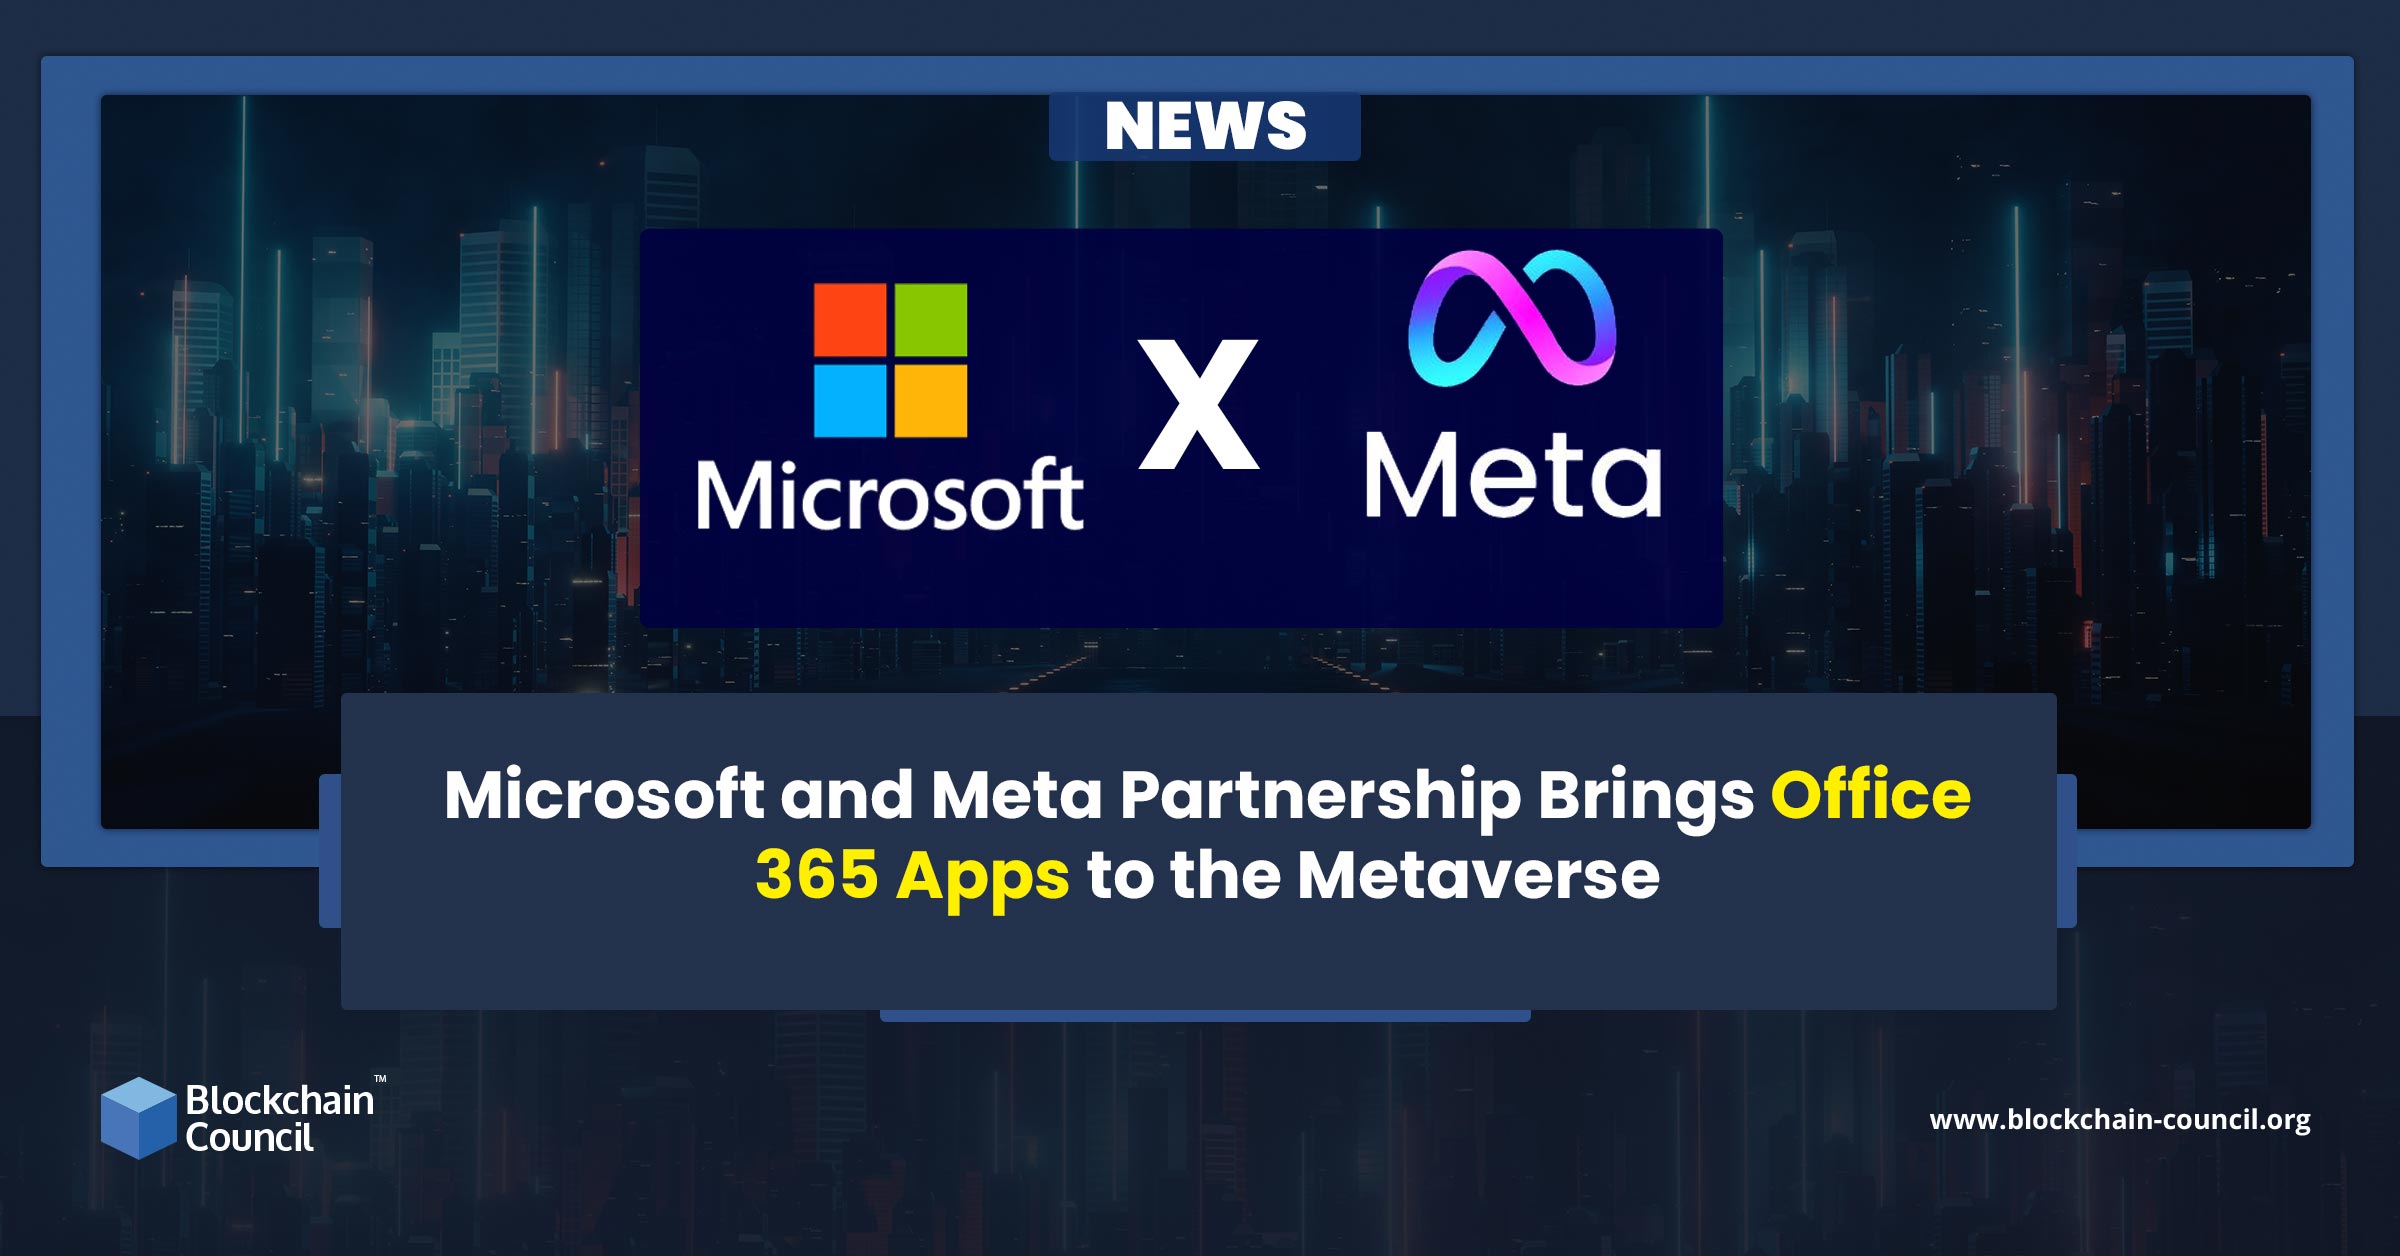 Microsoft and Meta Partnership Brings Office 365 Apps to the Metaverse